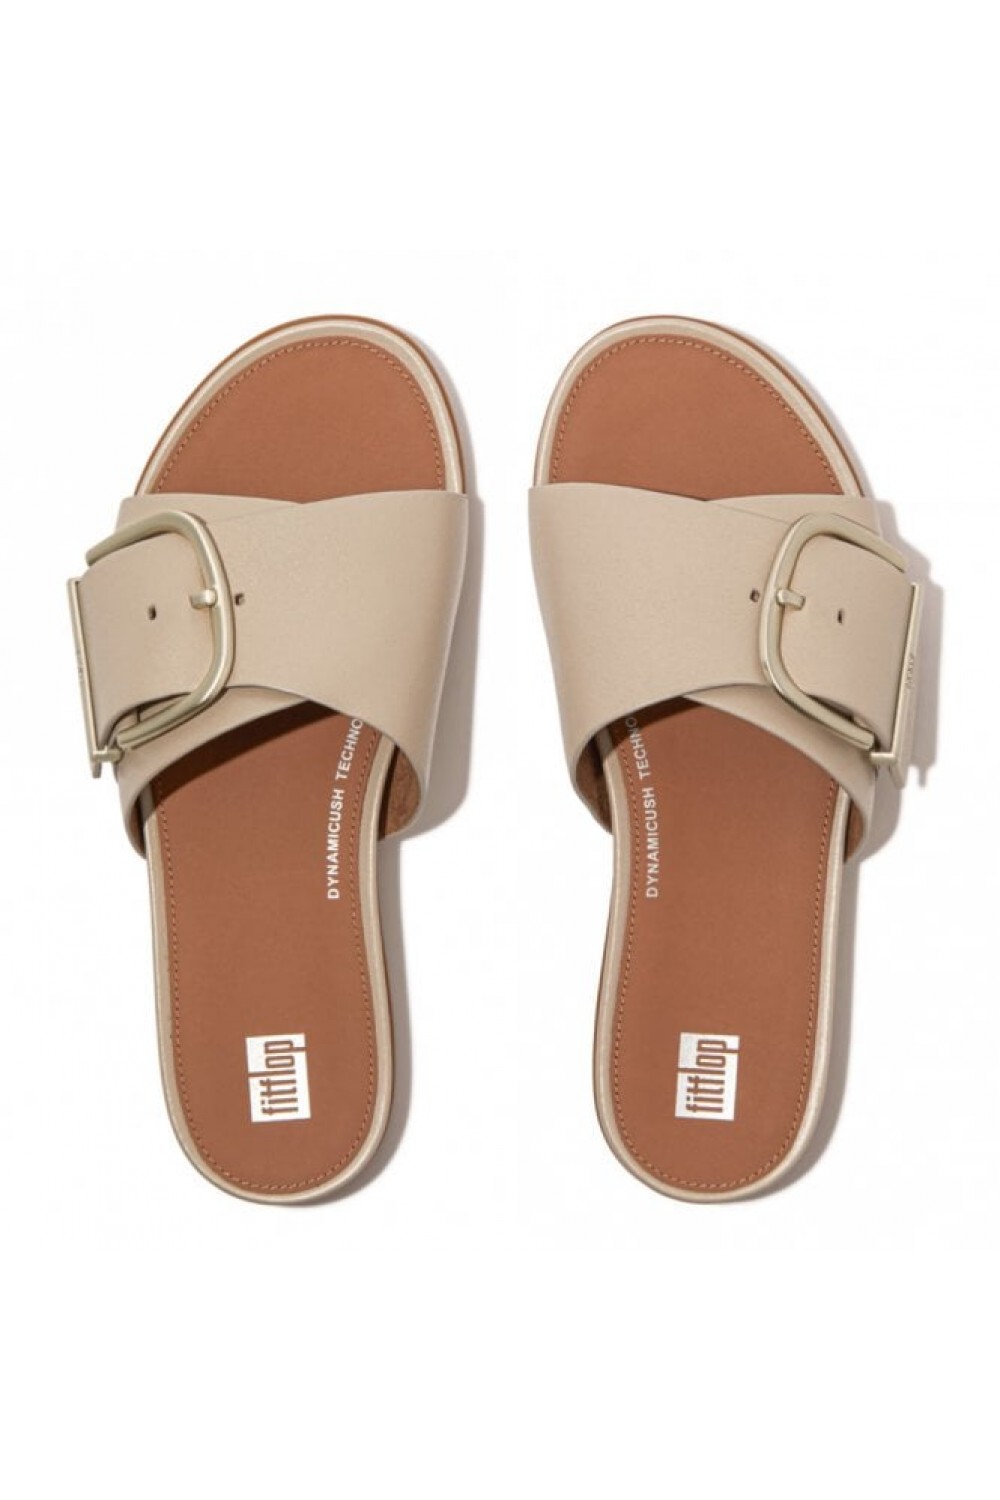 Fitflop Gracie Maxi-buckle Leather Slides Stone Beige